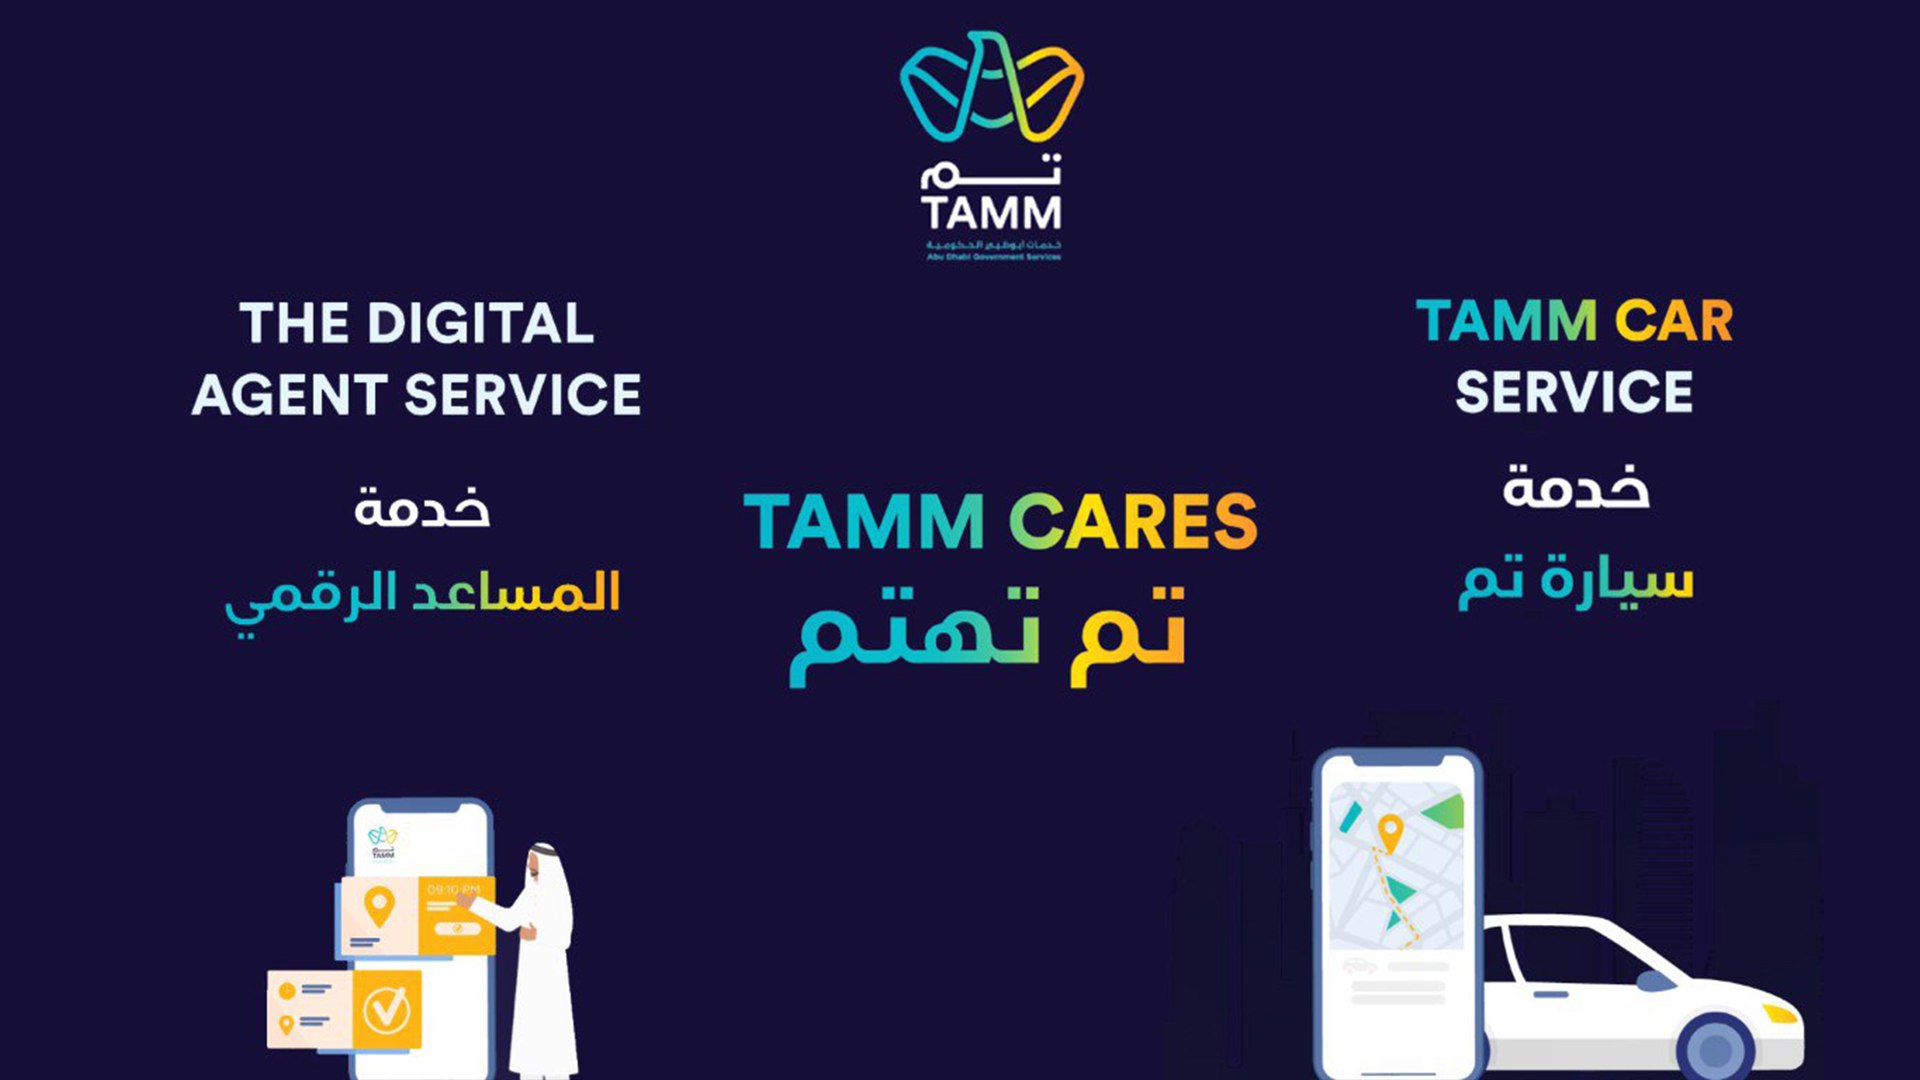 TAMM Launches New ‘Digital Agent’ Service For Customers In ABU DHABI